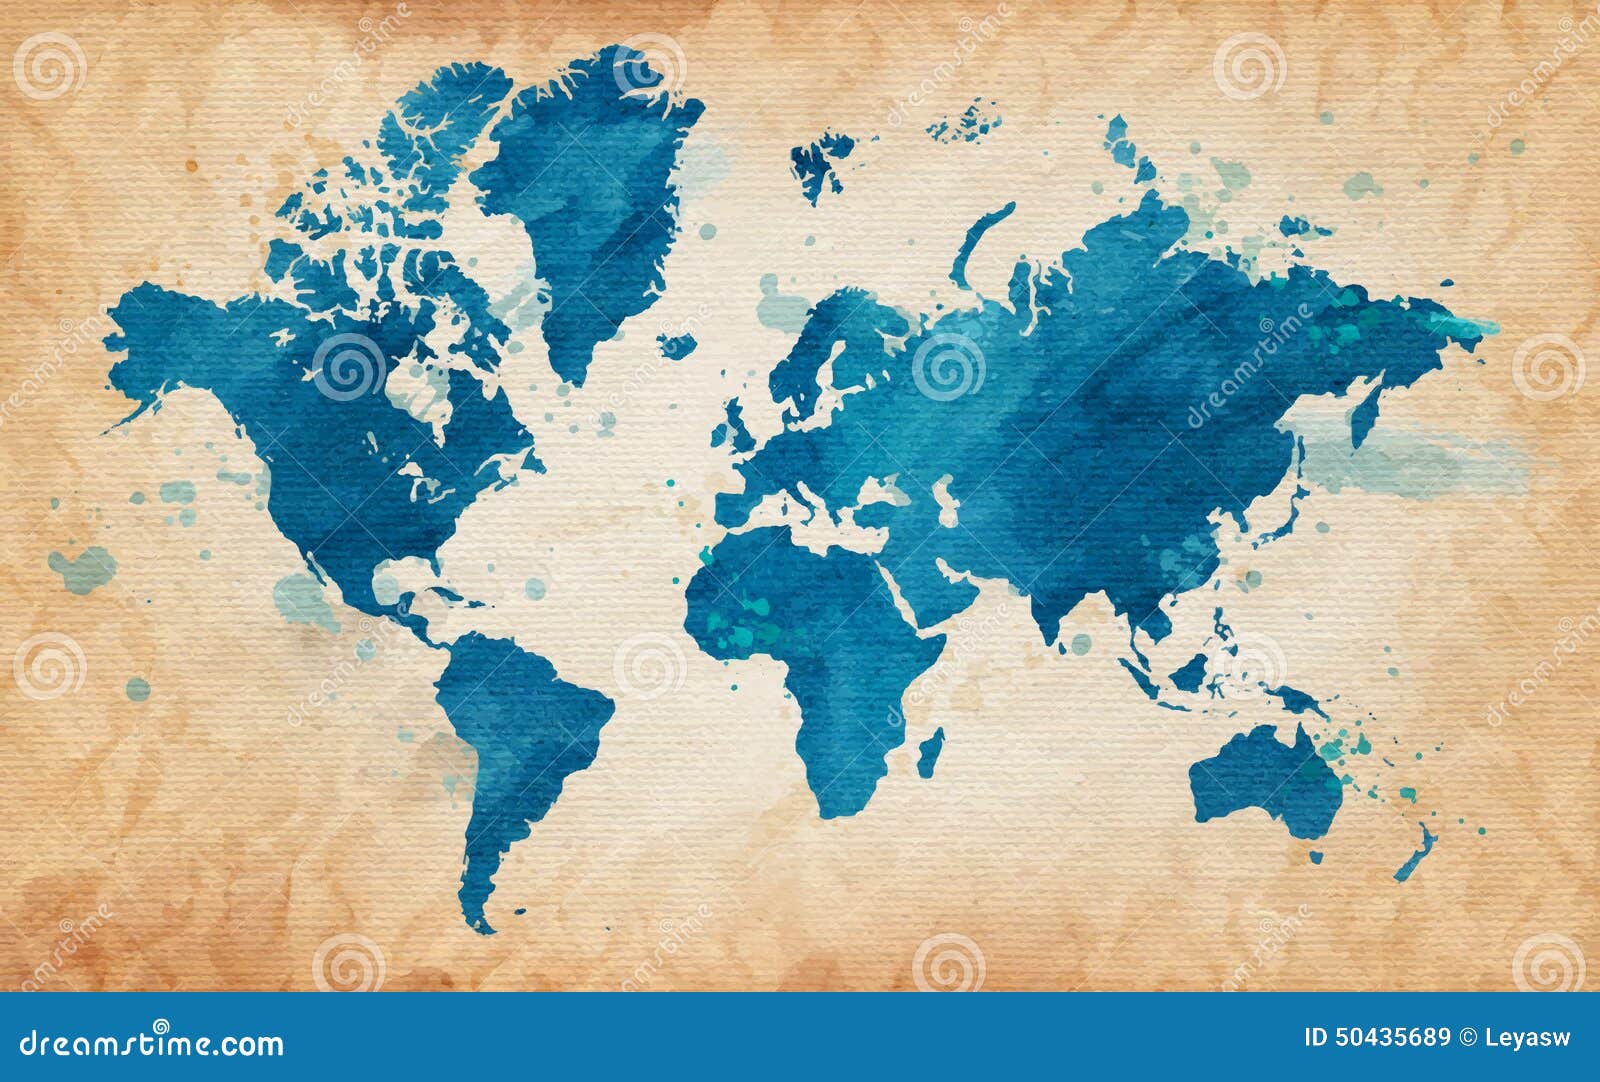 illustrated map of the world with a textured background and watercolor spots. grunge background. 